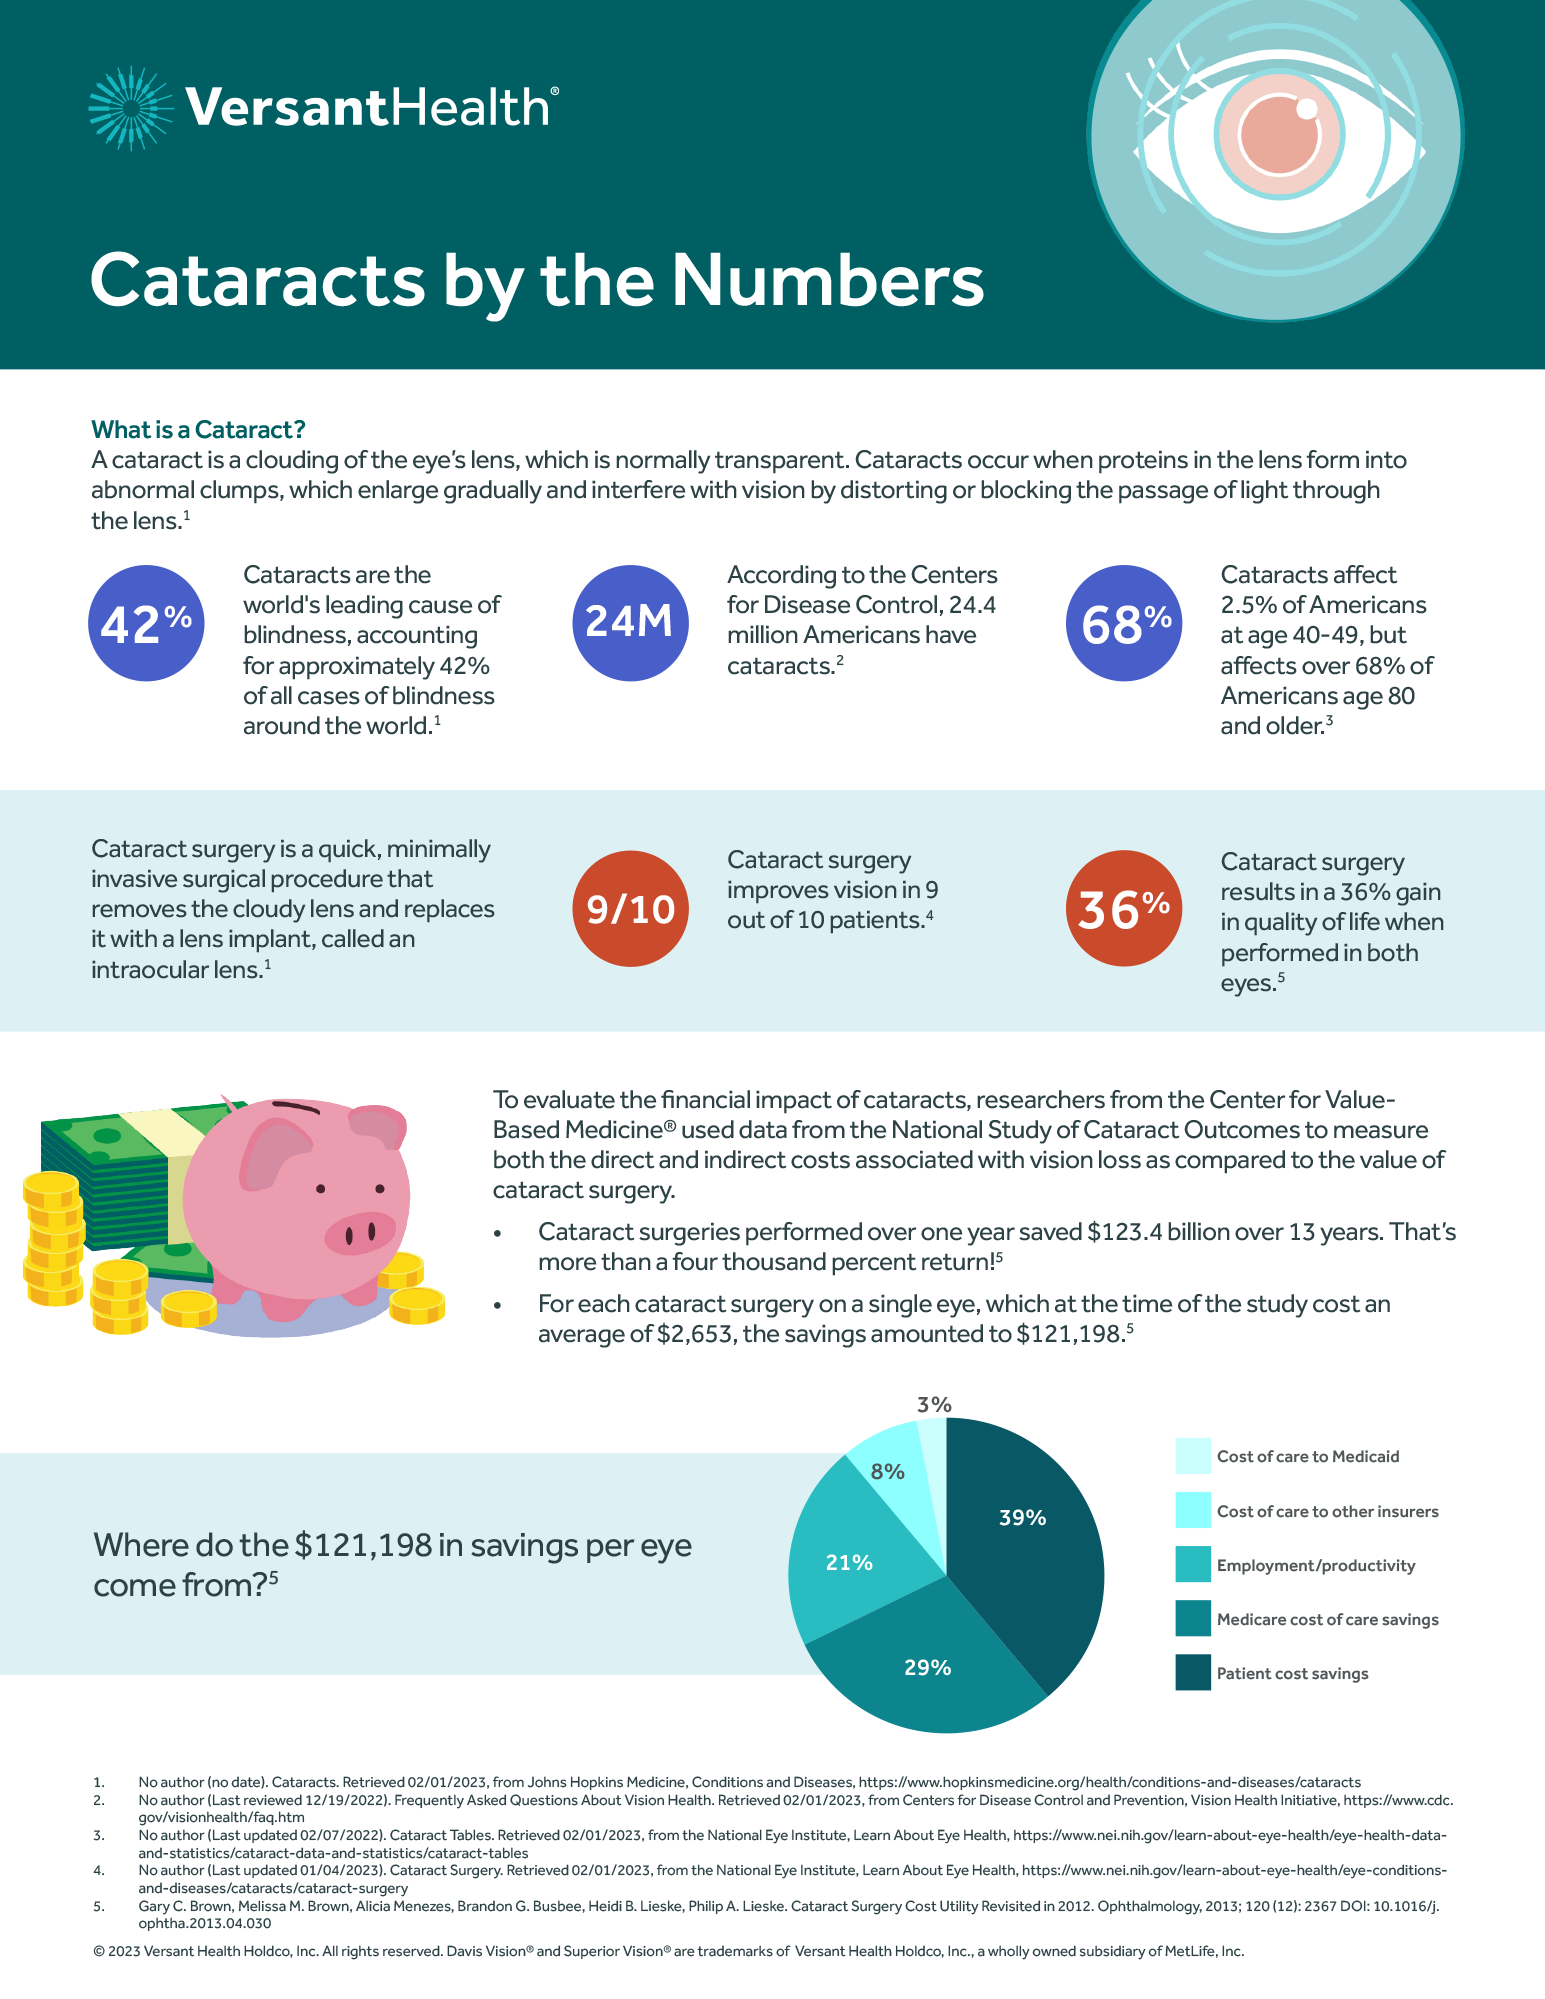 Screenshot of the cataracts by the numbers infographic